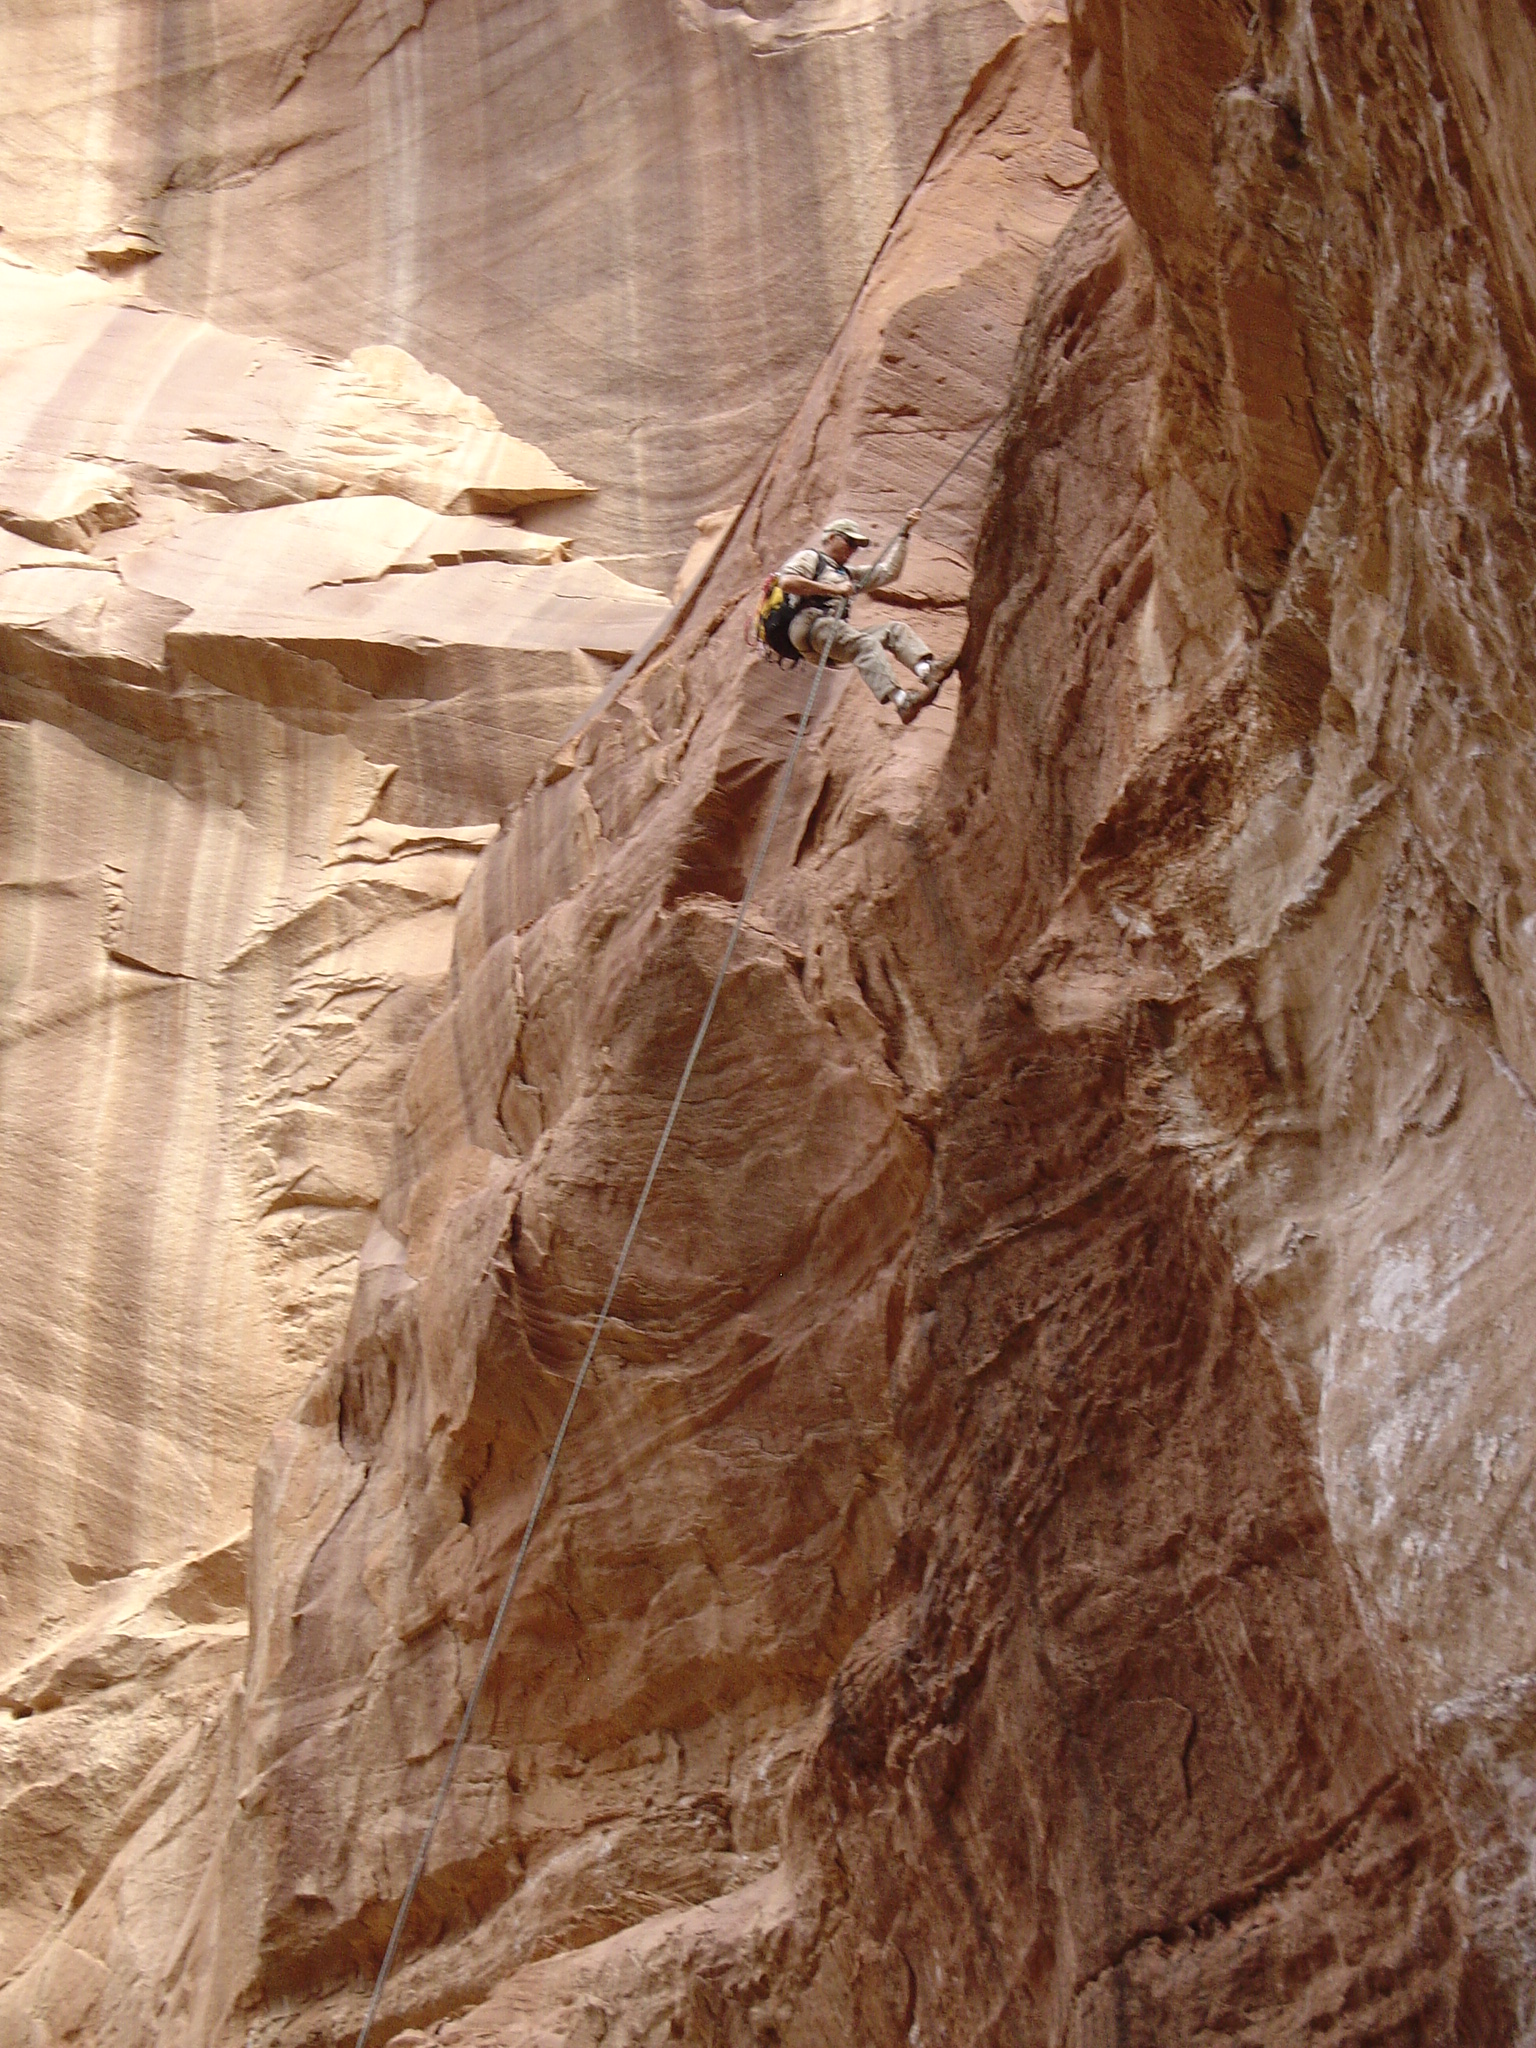 A big rappel down the wall of Mindbender Canyon. Photo by Jason Halladay.